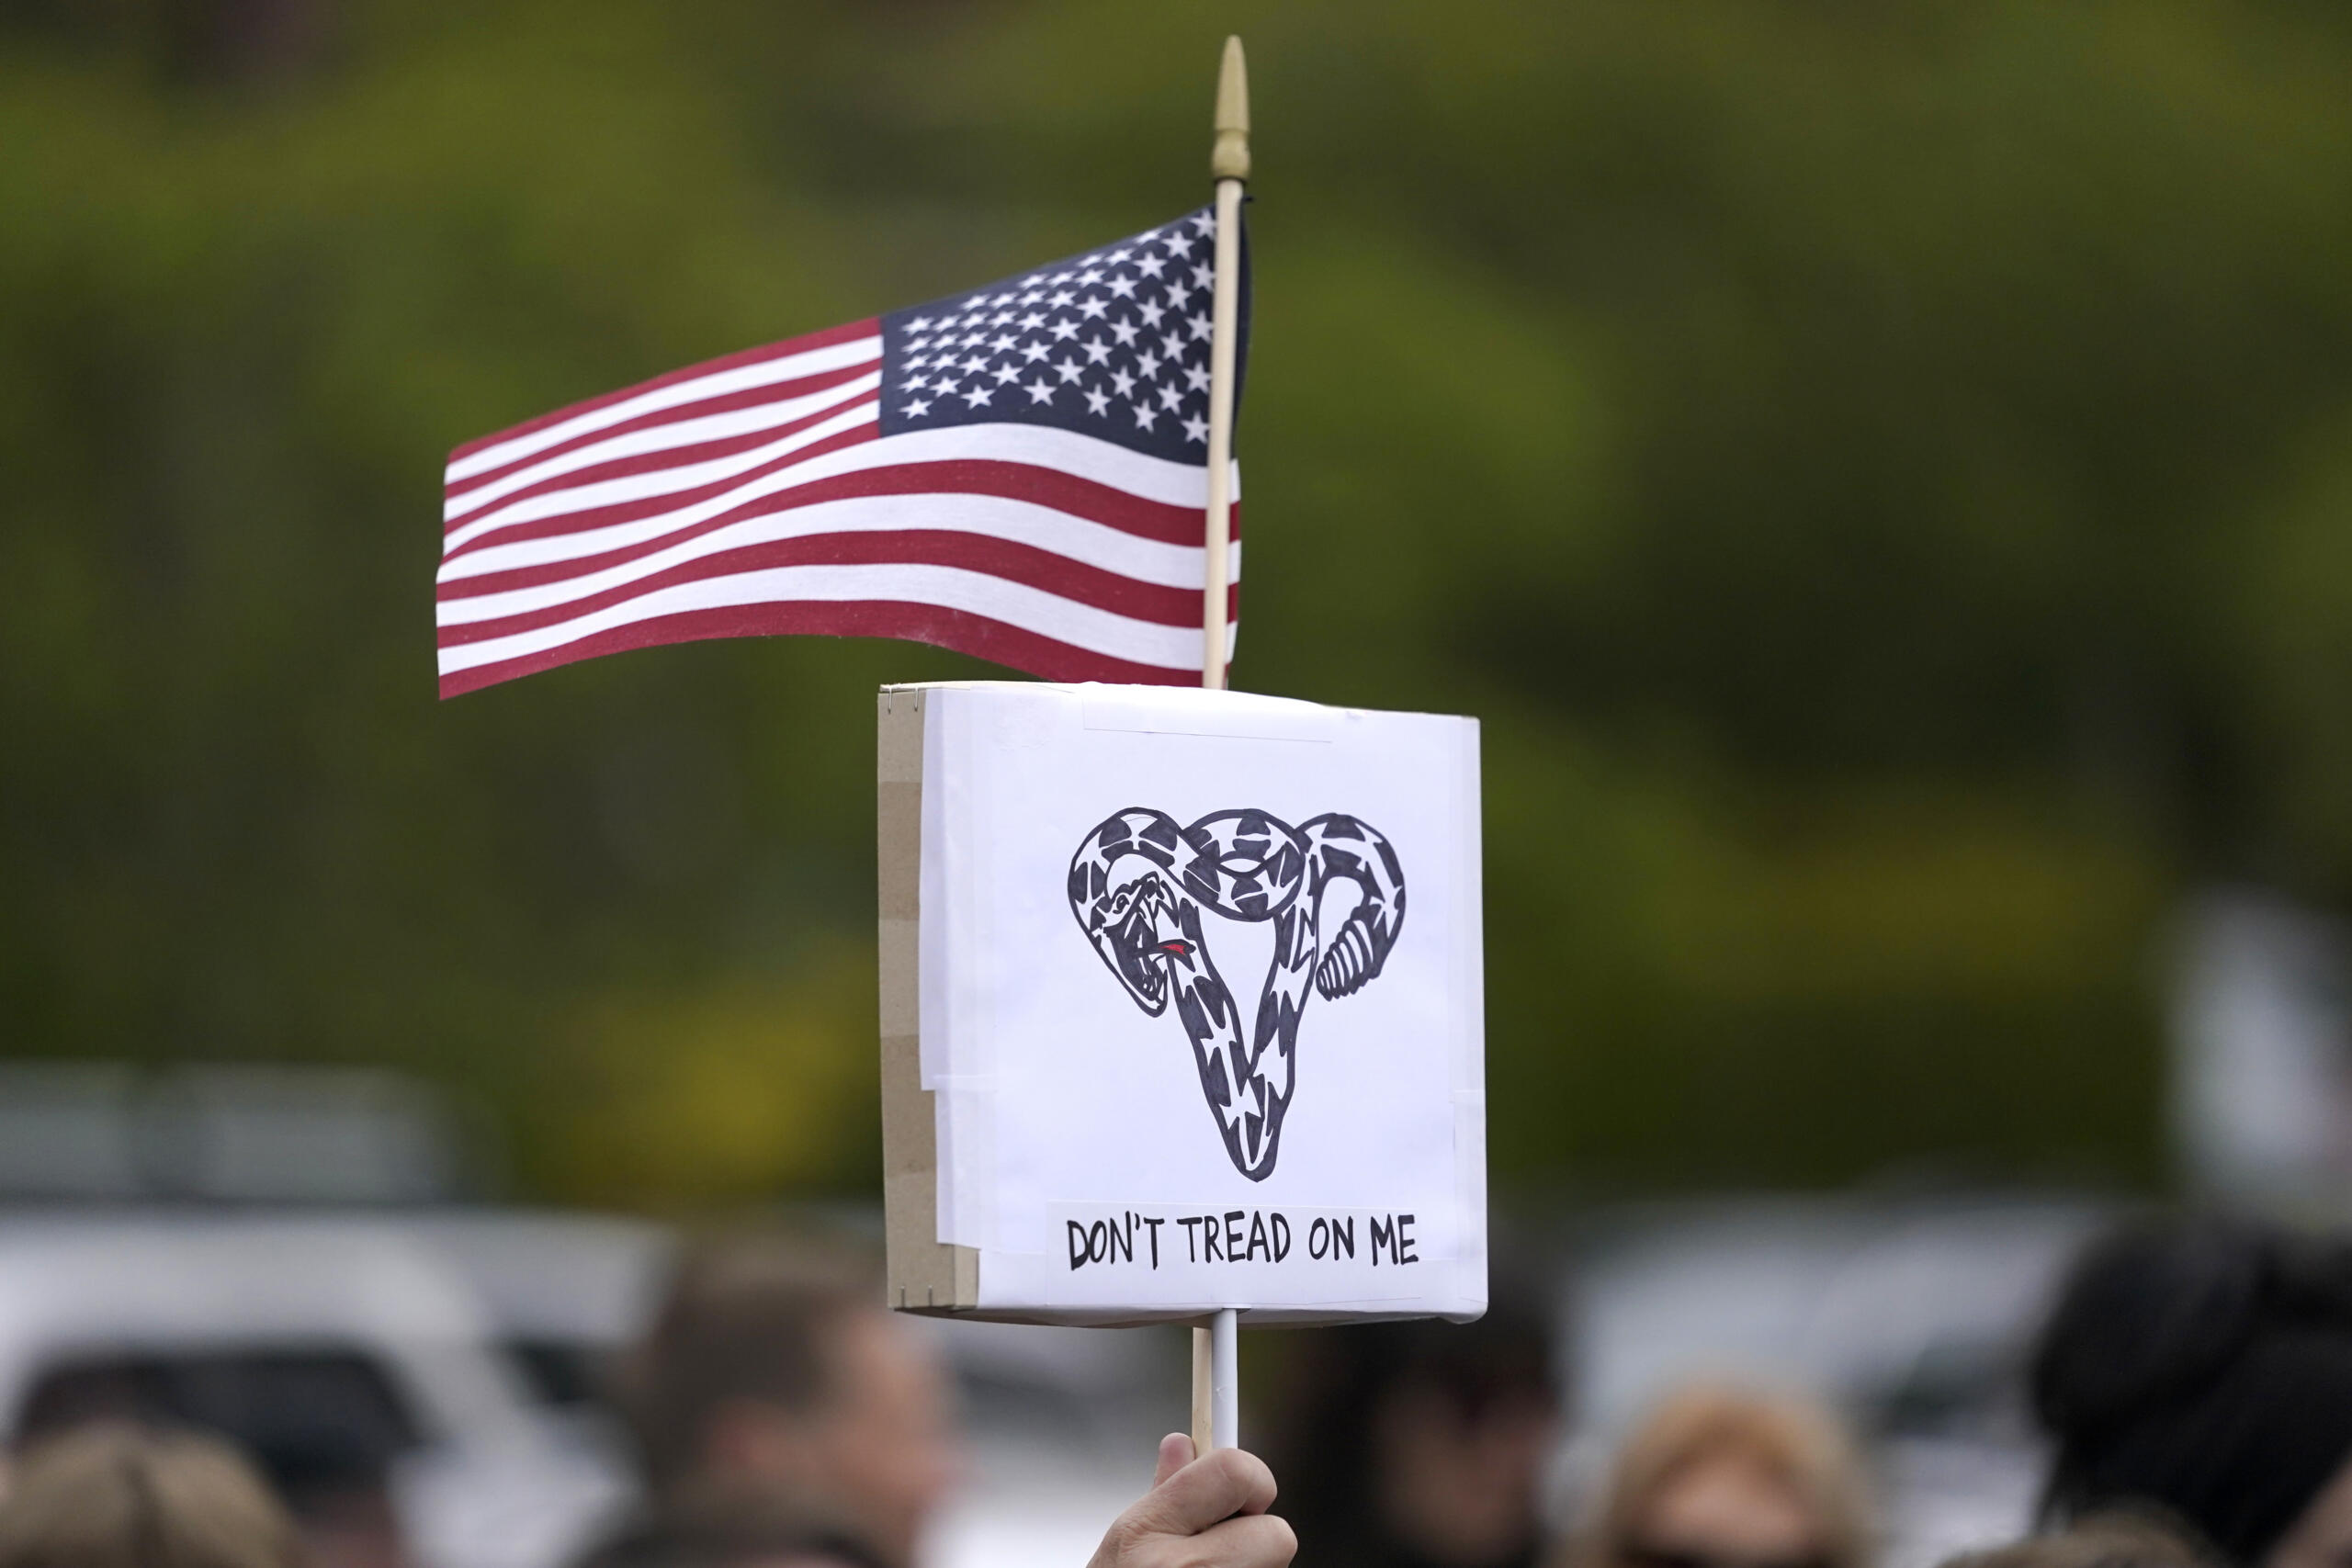 A person holds a sign that reads "Don't Tread On Me" with a uterus-shaped snake and an American  flag, Tuesday, May 3, 2022, during a rally at a park in Seattle in support of abortion rights. (AP Photo/Ted S.